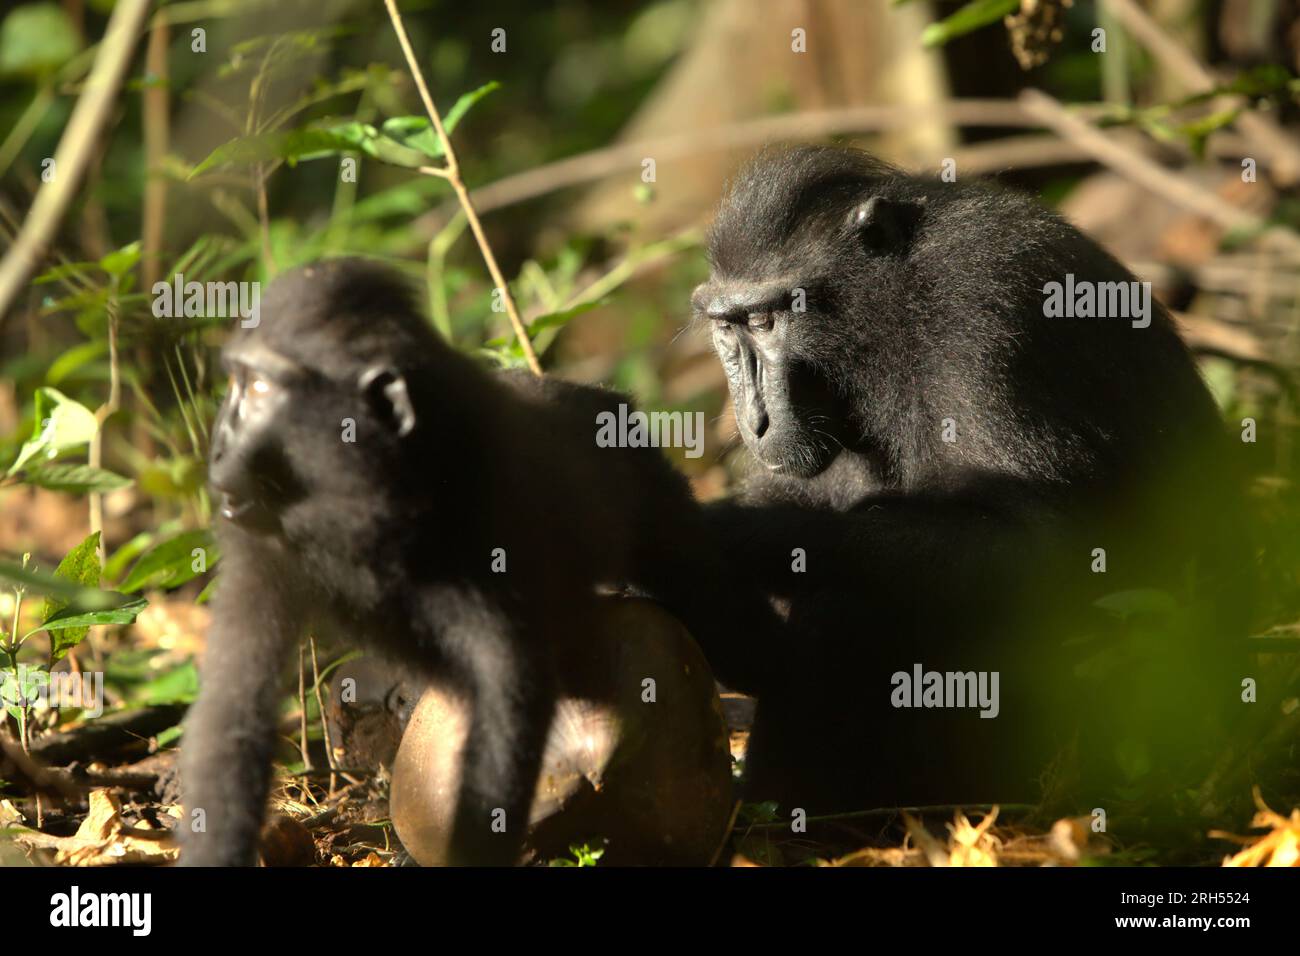 A crested macaque (Macaca nigra) is grooming another individual on forest floor in Tangkoko Nature Reserve, North Sulawesi, Indonesia. A recent report by a team of scientists led by Marine Joly revealed that temperature is increasing in Tangkoko forest, and the overall fruit abundance decreased. 'Between 2012 and 2020, temperatures increased by up to 0.2 degree Celsius per year in the forest, and the overall fruit abundance decreased by 1 percent per year,” they wrote on International Journal of Primatology in July 2023. Stock Photo